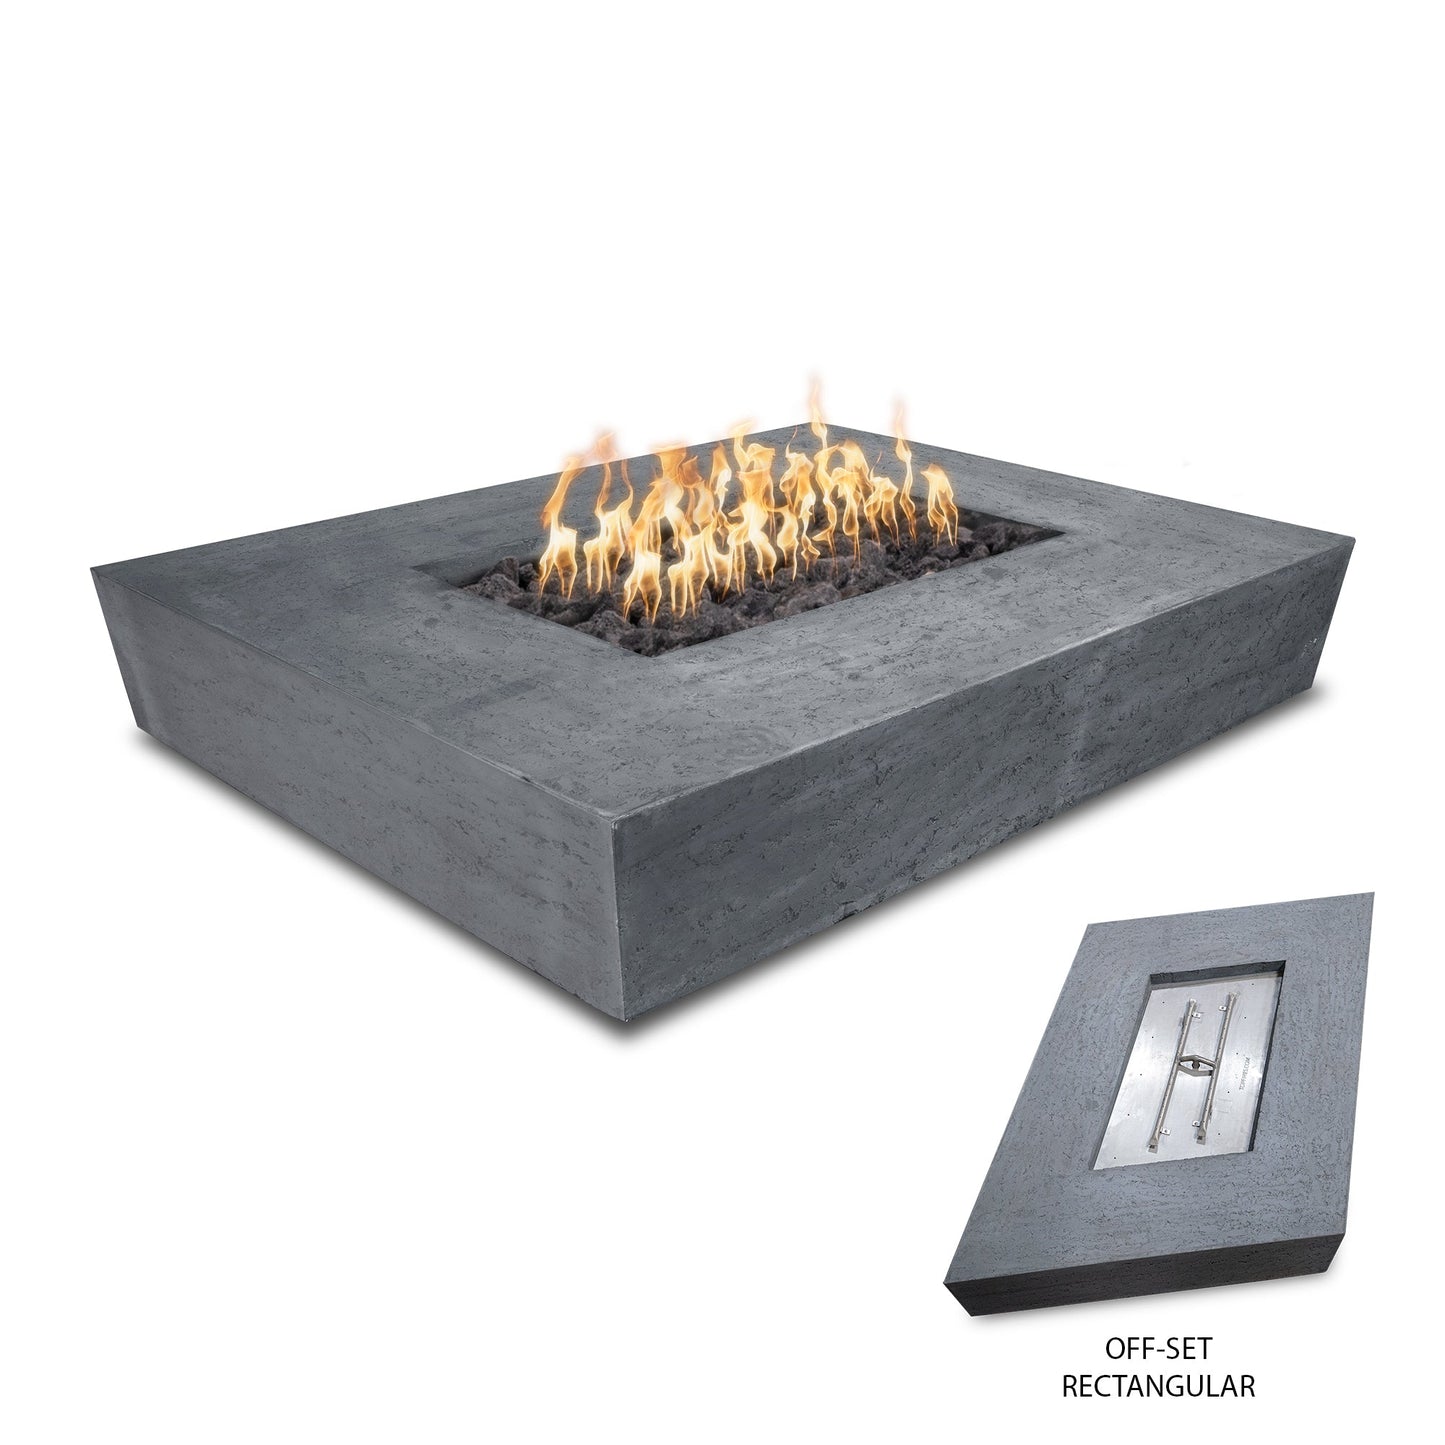 The Outdoor Plus Rectangular Heiko 58" Vanilla GFRC Concrete Liquid Propane Fire Pit with 110V Electronic Ignition